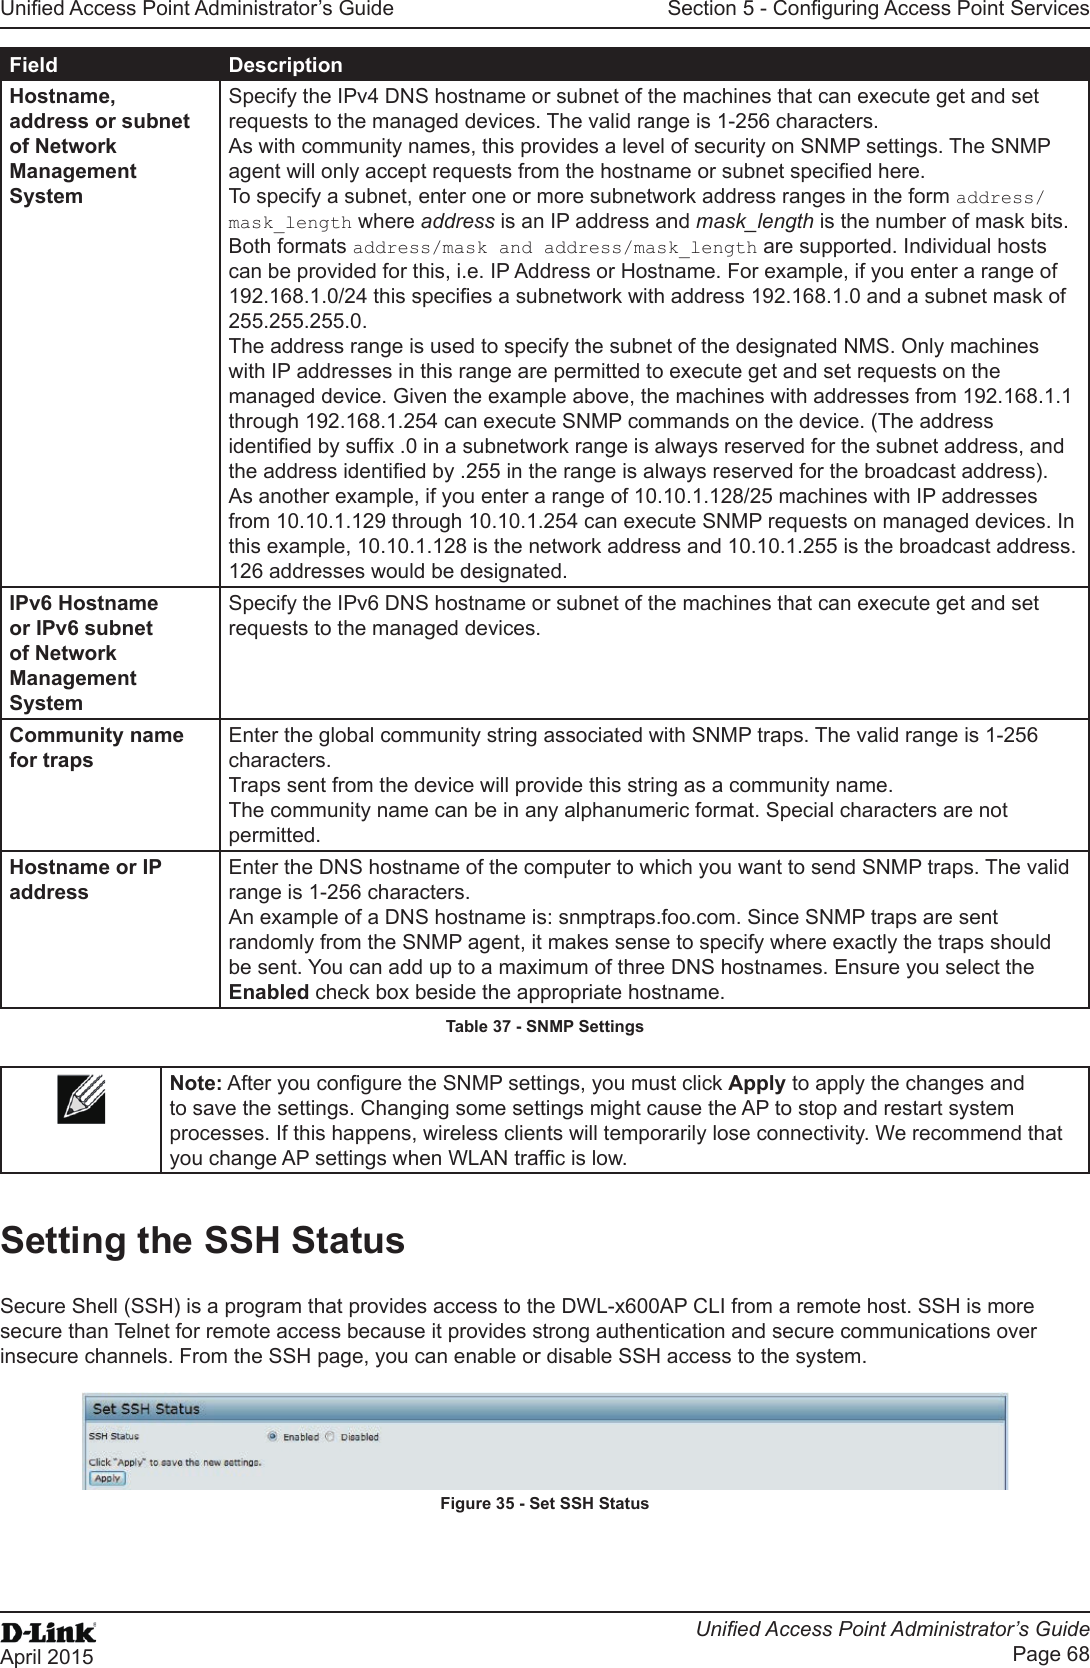 Unied Access Point Administrator’s GuideUnied Access Point Administrator’s GuidePage 68April 2015Section 5 - Conguring Access Point ServicesField DescriptionHostname, address or subnet of Network Management SystemSpecify the IPv4 DNS hostname or subnet of the machines that can execute get and set requests to the managed devices. The valid range is 1-256 characters.As with community names, this provides a level of security on SNMP settings. The SNMP agent will only accept requests from the hostname or subnet specied here.To specify a subnet, enter one or more subnetwork address ranges in the form address/mask_length where address is an IP address and mask_length is the number of mask bits. Both formats address/mask and address/mask_length are supported. Individual hosts can be provided for this, i.e. IP Address or Hostname. For example, if you enter a range of 192.168.1.0/24 this species a subnetwork with address 192.168.1.0 and a subnet mask of 255.255.255.0. The address range is used to specify the subnet of the designated NMS. Only machines with IP addresses in this range are permitted to execute get and set requests on the managed device. Given the example above, the machines with addresses from 192.168.1.1 through 192.168.1.254 can execute SNMP commands on the device. (The address identied by sufx .0 in a subnetwork range is always reserved for the subnet address, and the address identied by .255 in the range is always reserved for the broadcast address). As another example, if you enter a range of 10.10.1.128/25 machines with IP addresses from 10.10.1.129 through 10.10.1.254 can execute SNMP requests on managed devices. In this example, 10.10.1.128 is the network address and 10.10.1.255 is the broadcast address. 126 addresses would be designated.IPv6 Hostname or IPv6 subnet of Network Management SystemSpecify the IPv6 DNS hostname or subnet of the machines that can execute get and set requests to the managed devices.Community name for trapsEnter the global community string associated with SNMP traps. The valid range is 1-256 characters.Traps sent from the device will provide this string as a community name.The community name can be in any alphanumeric format. Special characters are not permitted.Hostname or IP addressEnter the DNS hostname of the computer to which you want to send SNMP traps. The valid range is 1-256 characters.An example of a DNS hostname is: snmptraps.foo.com. Since SNMP traps are sent randomly from the SNMP agent, it makes sense to specify where exactly the traps should be sent. You can add up to a maximum of three DNS hostnames. Ensure you select the Enabled check box beside the appropriate hostname.Table 37 - SNMP SettingsNote: After you congure the SNMP settings, you must click Apply to apply the changes and to save the settings. Changing some settings might cause the AP to stop and restart system processes. If this happens, wireless clients will temporarily lose connectivity. We recommend that you change AP settings when WLAN trafc is low.Setting the SSH StatusSecure Shell (SSH) is a program that provides access to the DWL-x600AP CLI from a remote host. SSH is more secure than Telnet for remote access because it provides strong authentication and secure communications over insecure channels. From the SSH page, you can enable or disable SSH access to the system. Figure 35 - Set SSH Status